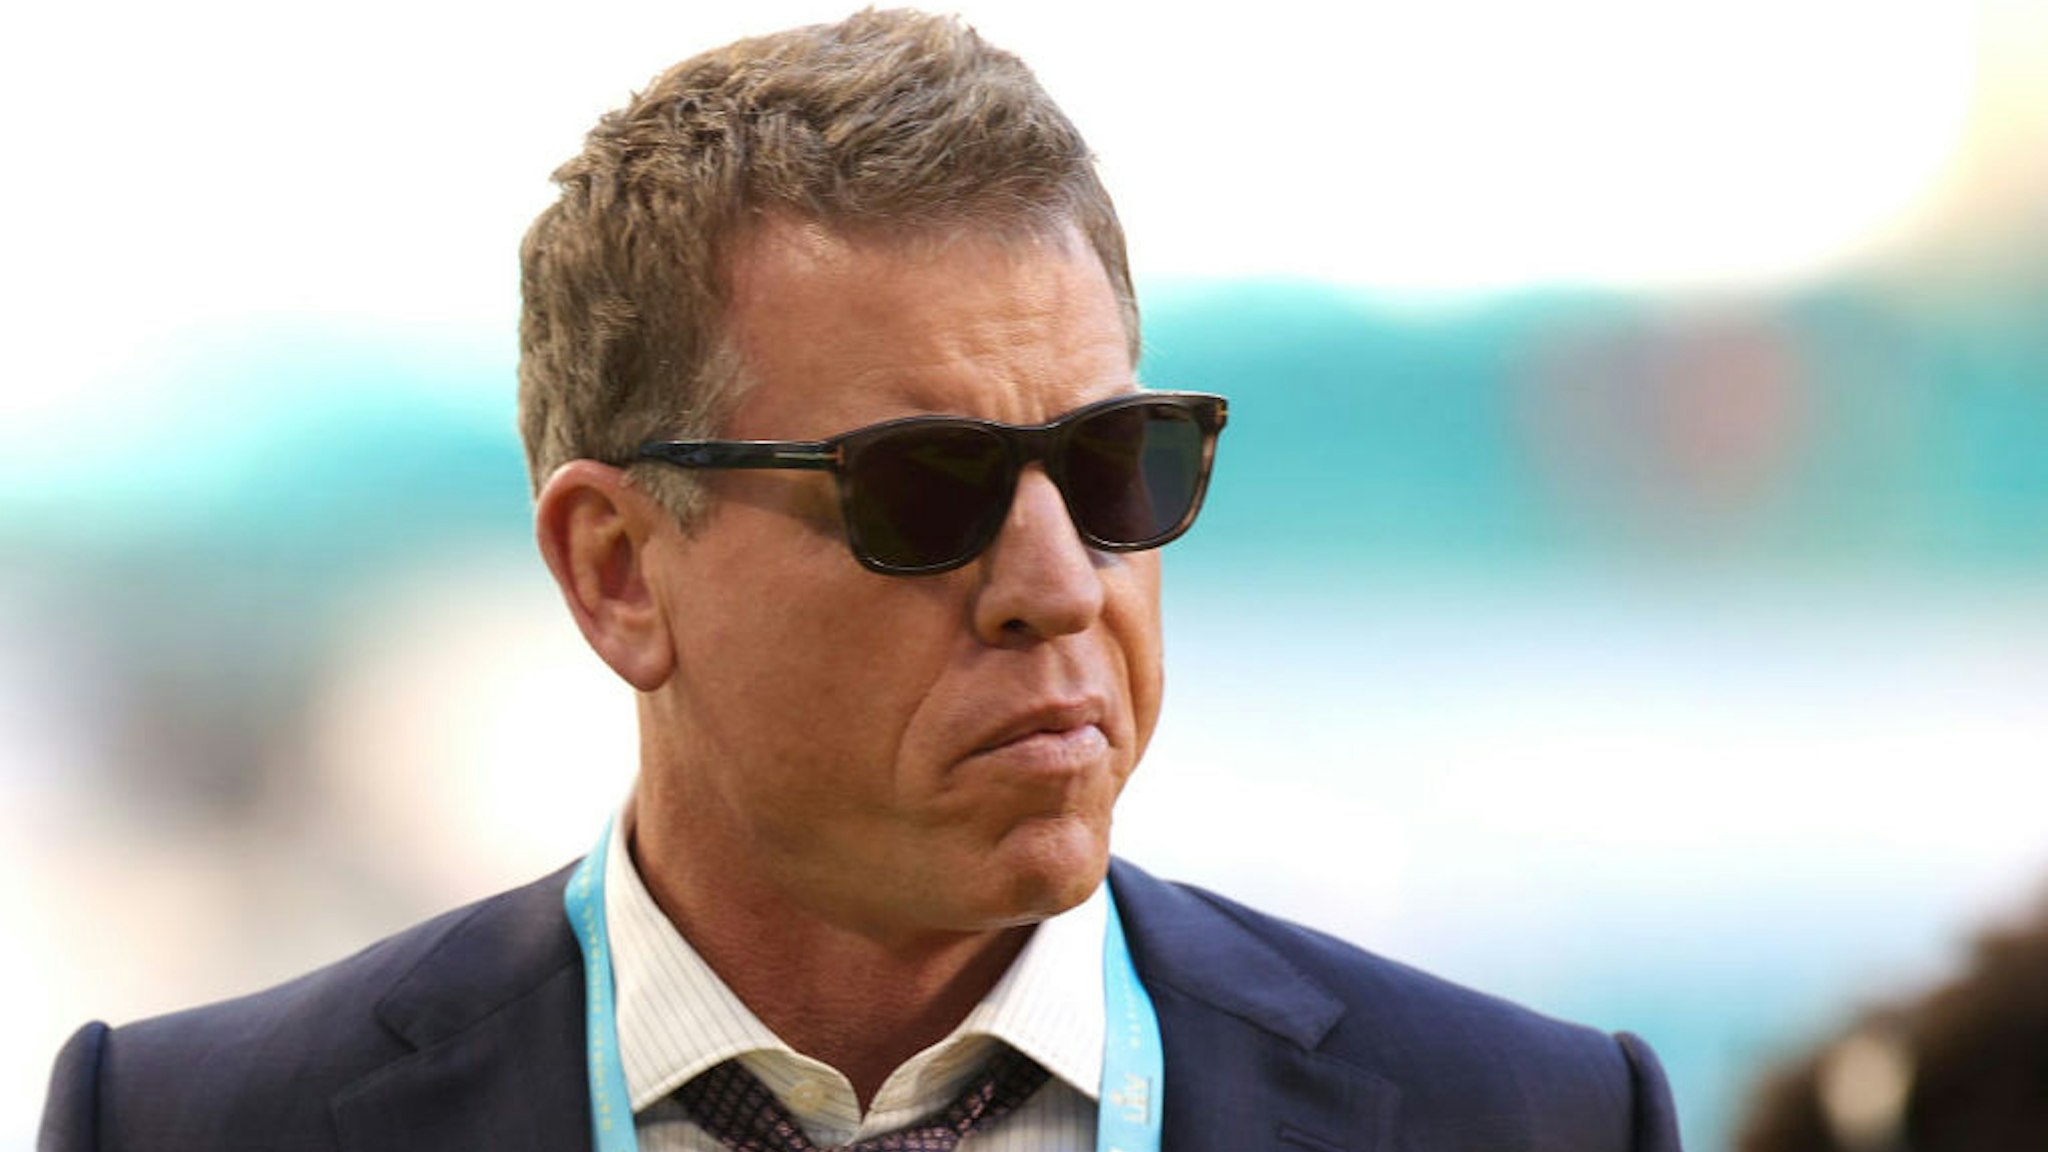 MIAMI, FLORIDA - FEBRUARY 02: Former player Troy Aikman arrives at Super Bowl LIV at Hard Rock Stadium on February 02, 2020 in Miami, Florida. (Photo by Rob Carr/Getty Images)